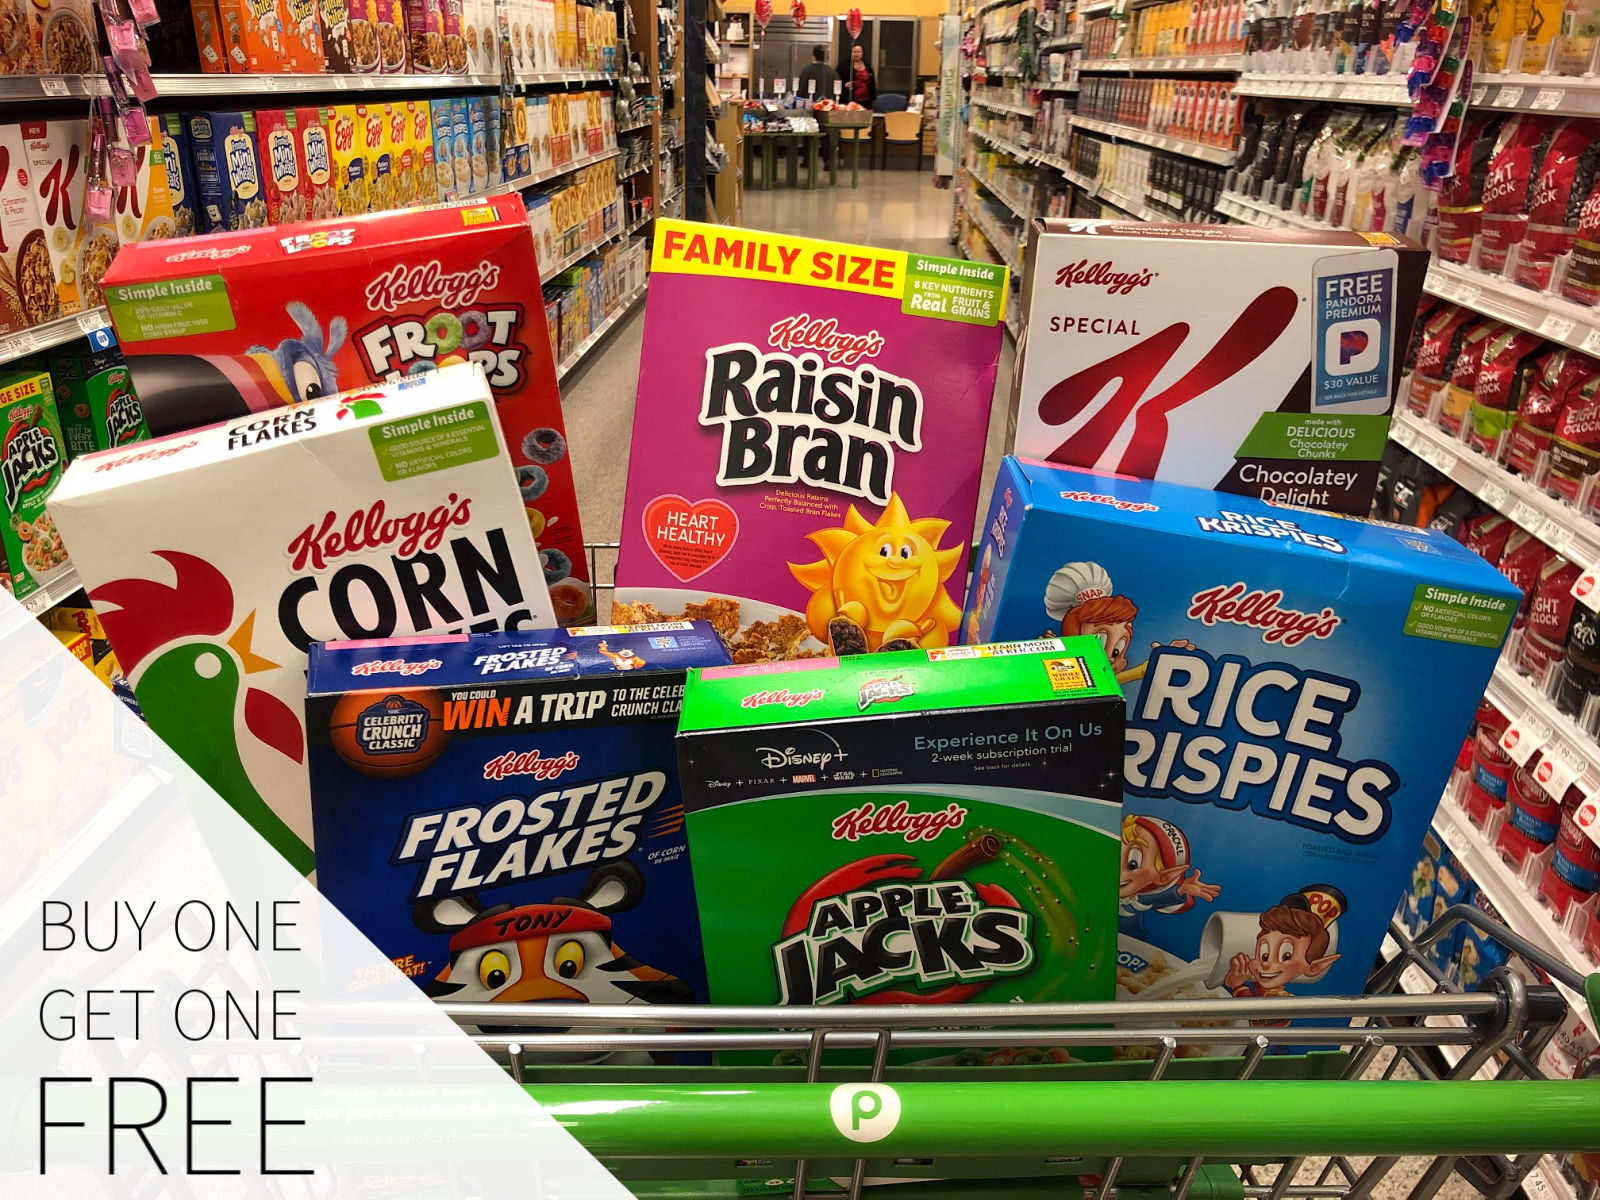 Big News!! All Kellogg’s Cereals Are Buy One Get One FREE This Week At Publix!